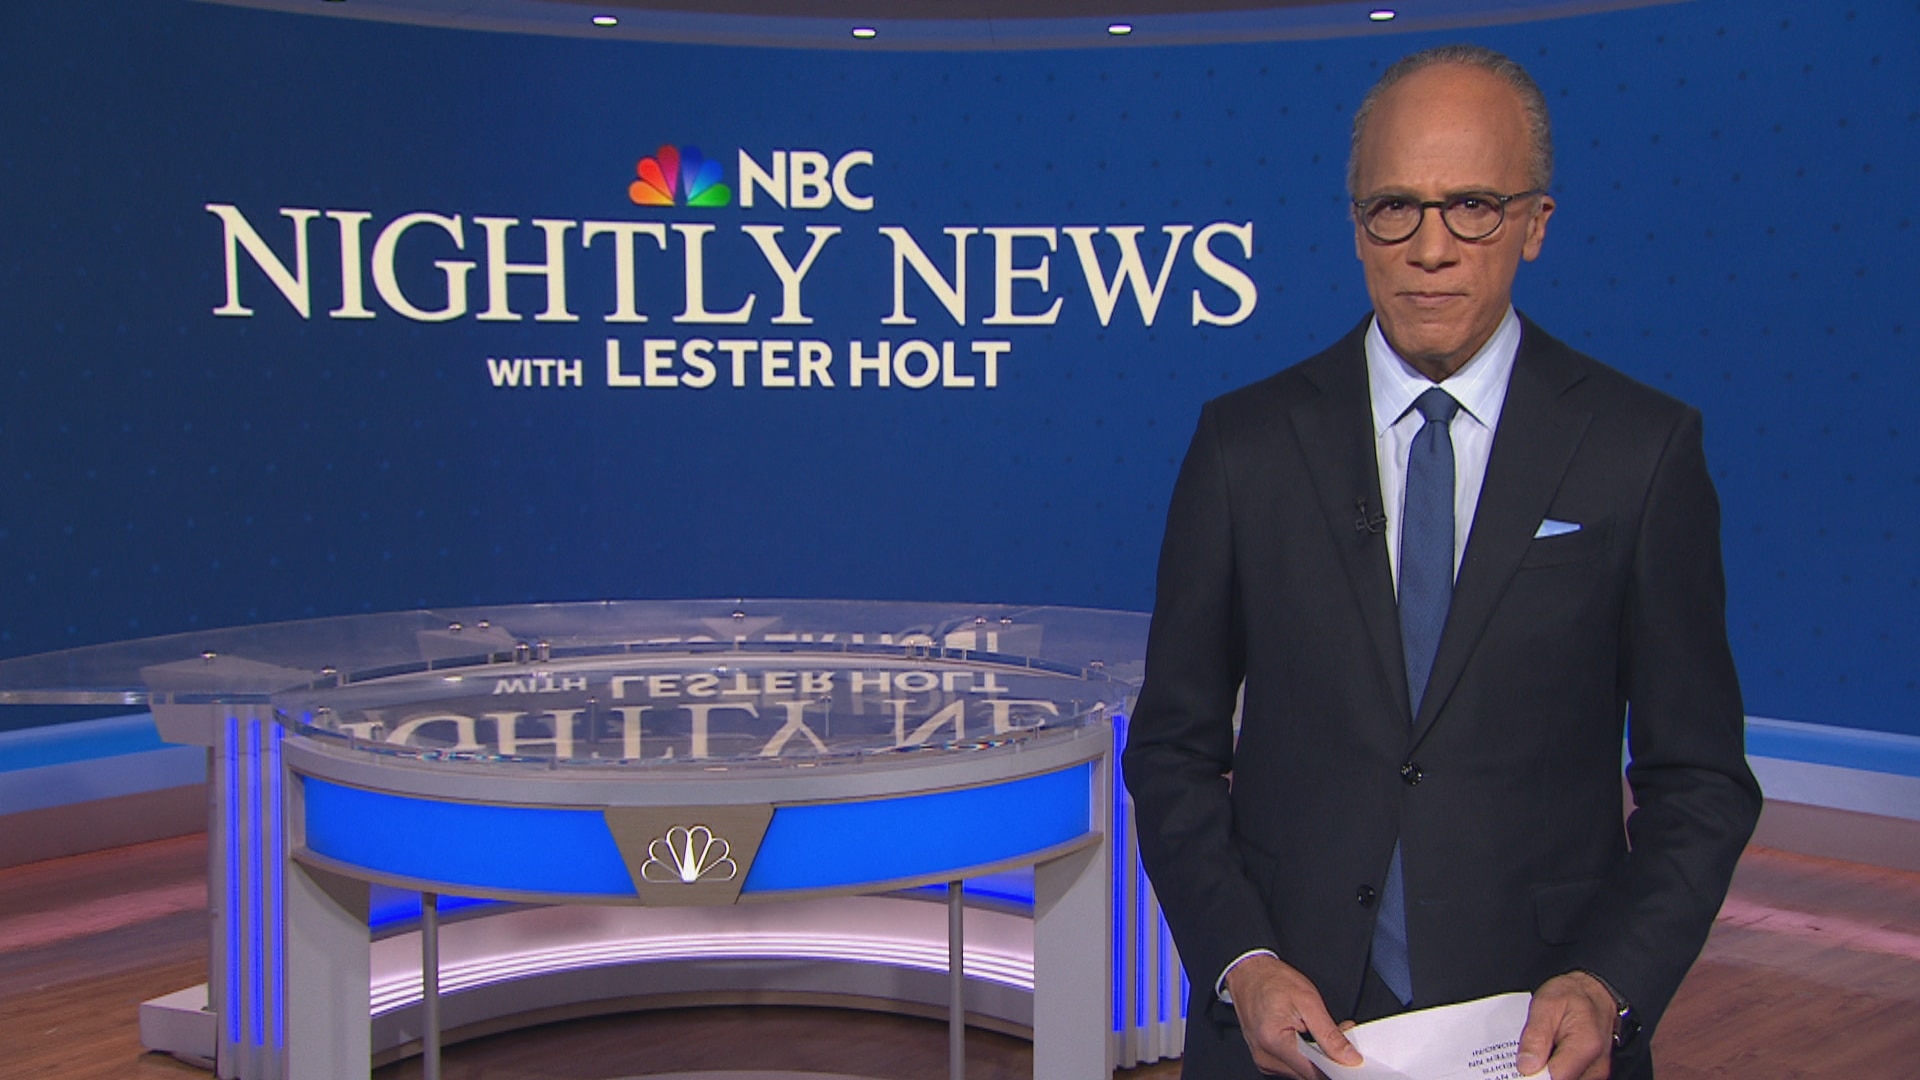 Watch Nbc Nightly News With Lester Holt Excerpt Nightly News Full Broadcast March 9th